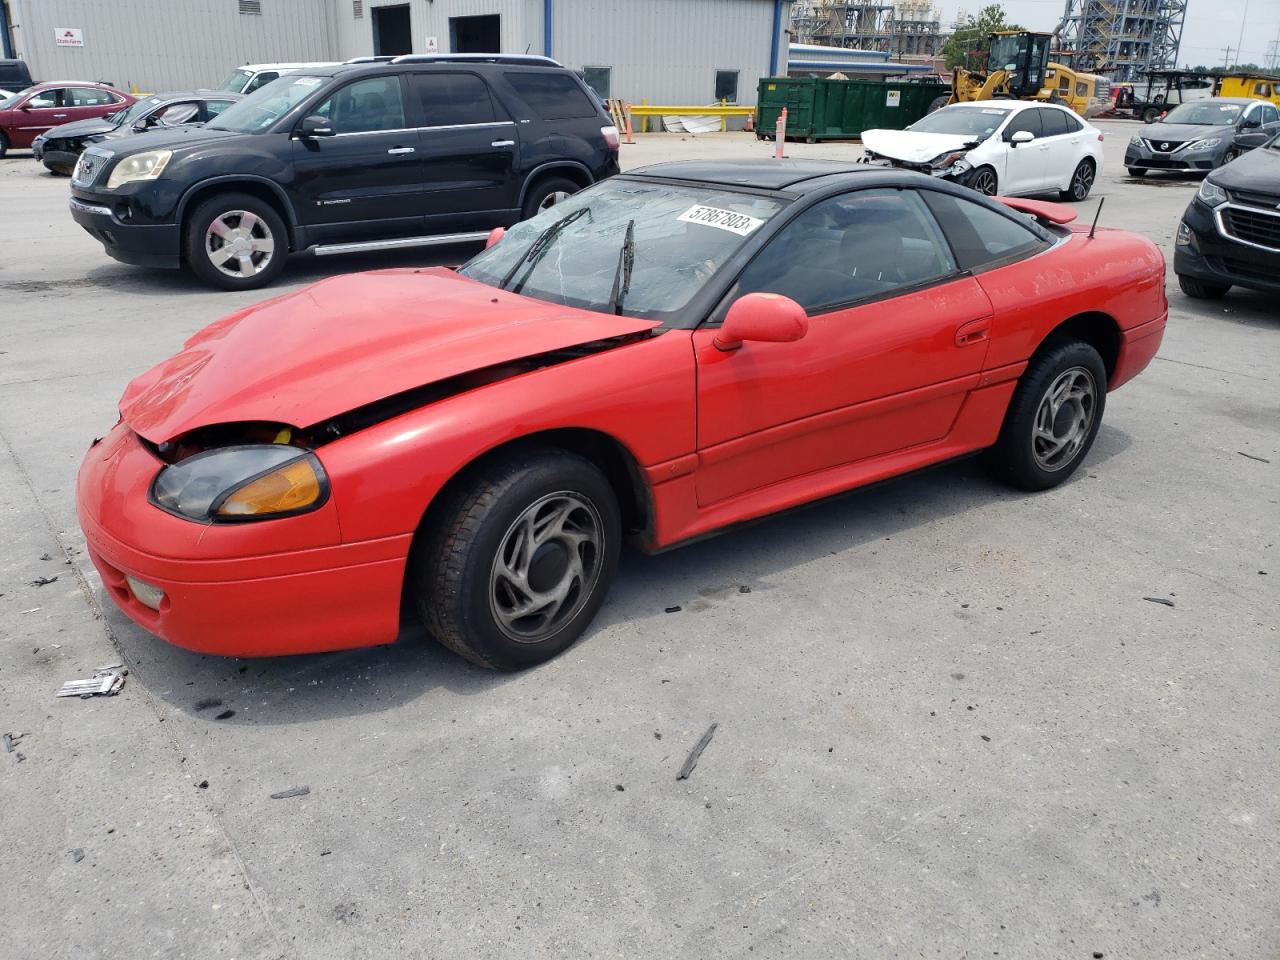 vin: JB3AM44H4RY020347 JB3AM44H4RY020347 1994 dodge stealth 3000 for Sale in 70129 2348, La - New Orleans, New Orleans, USA